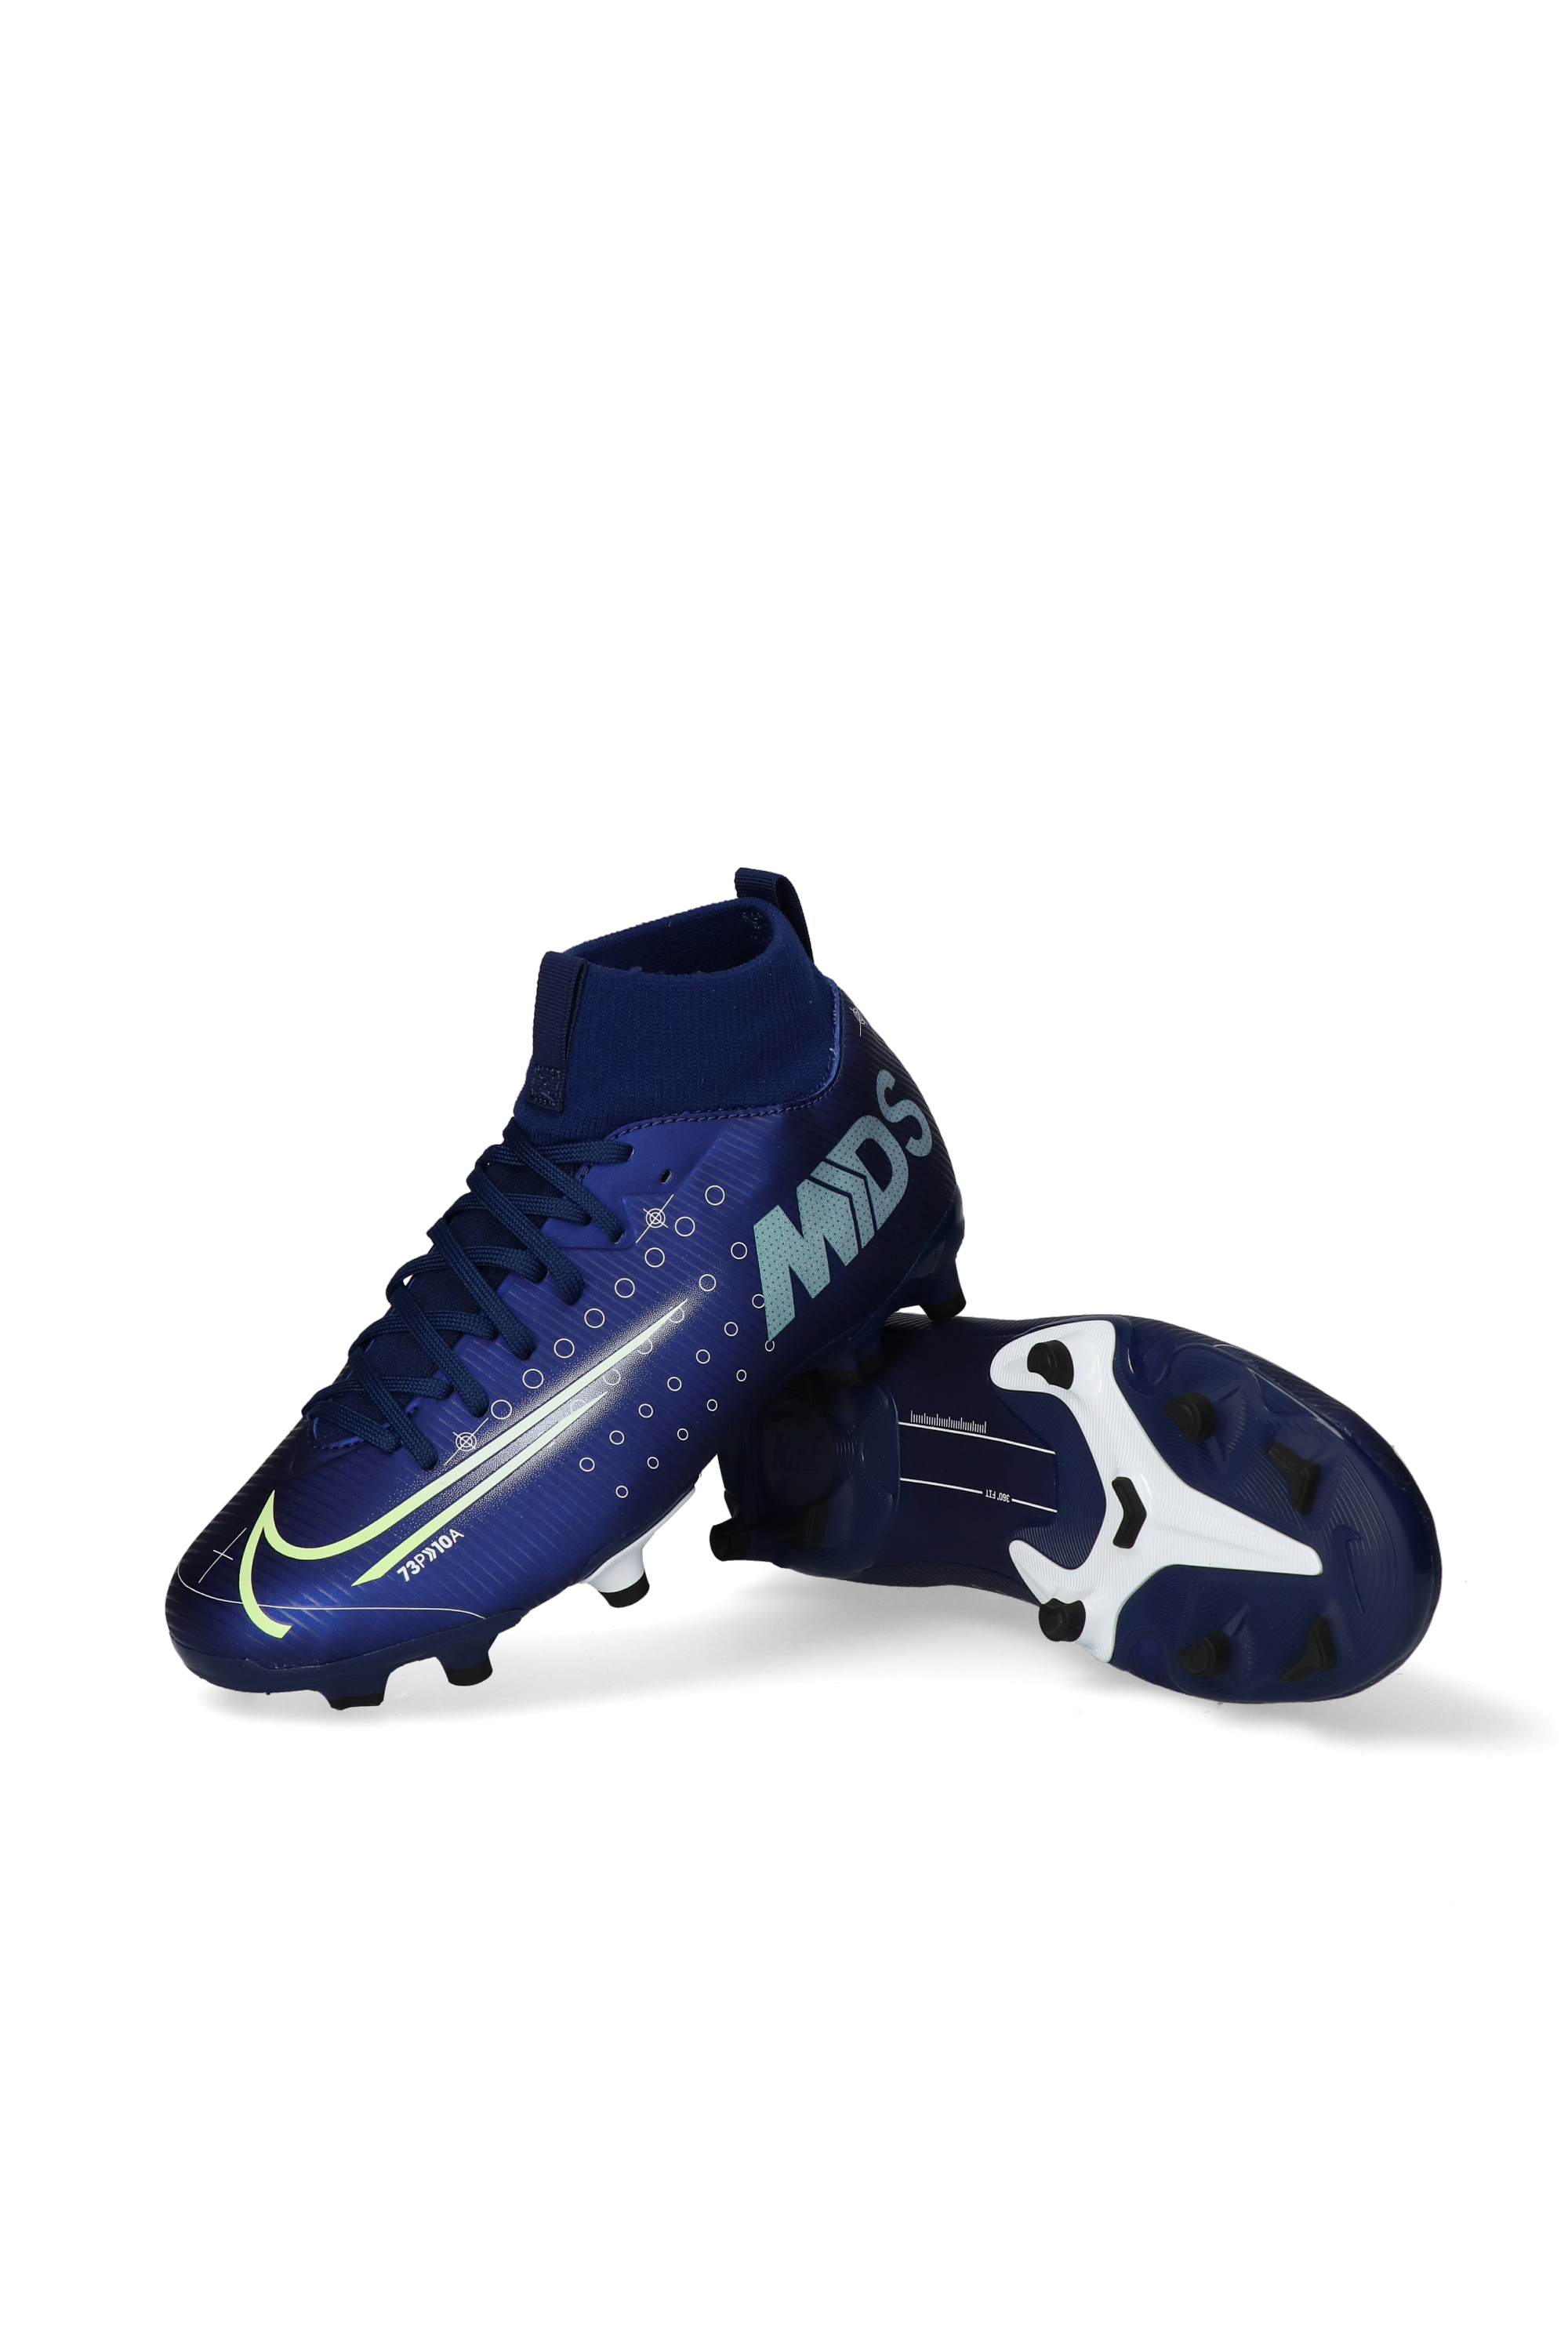 mercurial superfly 7 academy mds